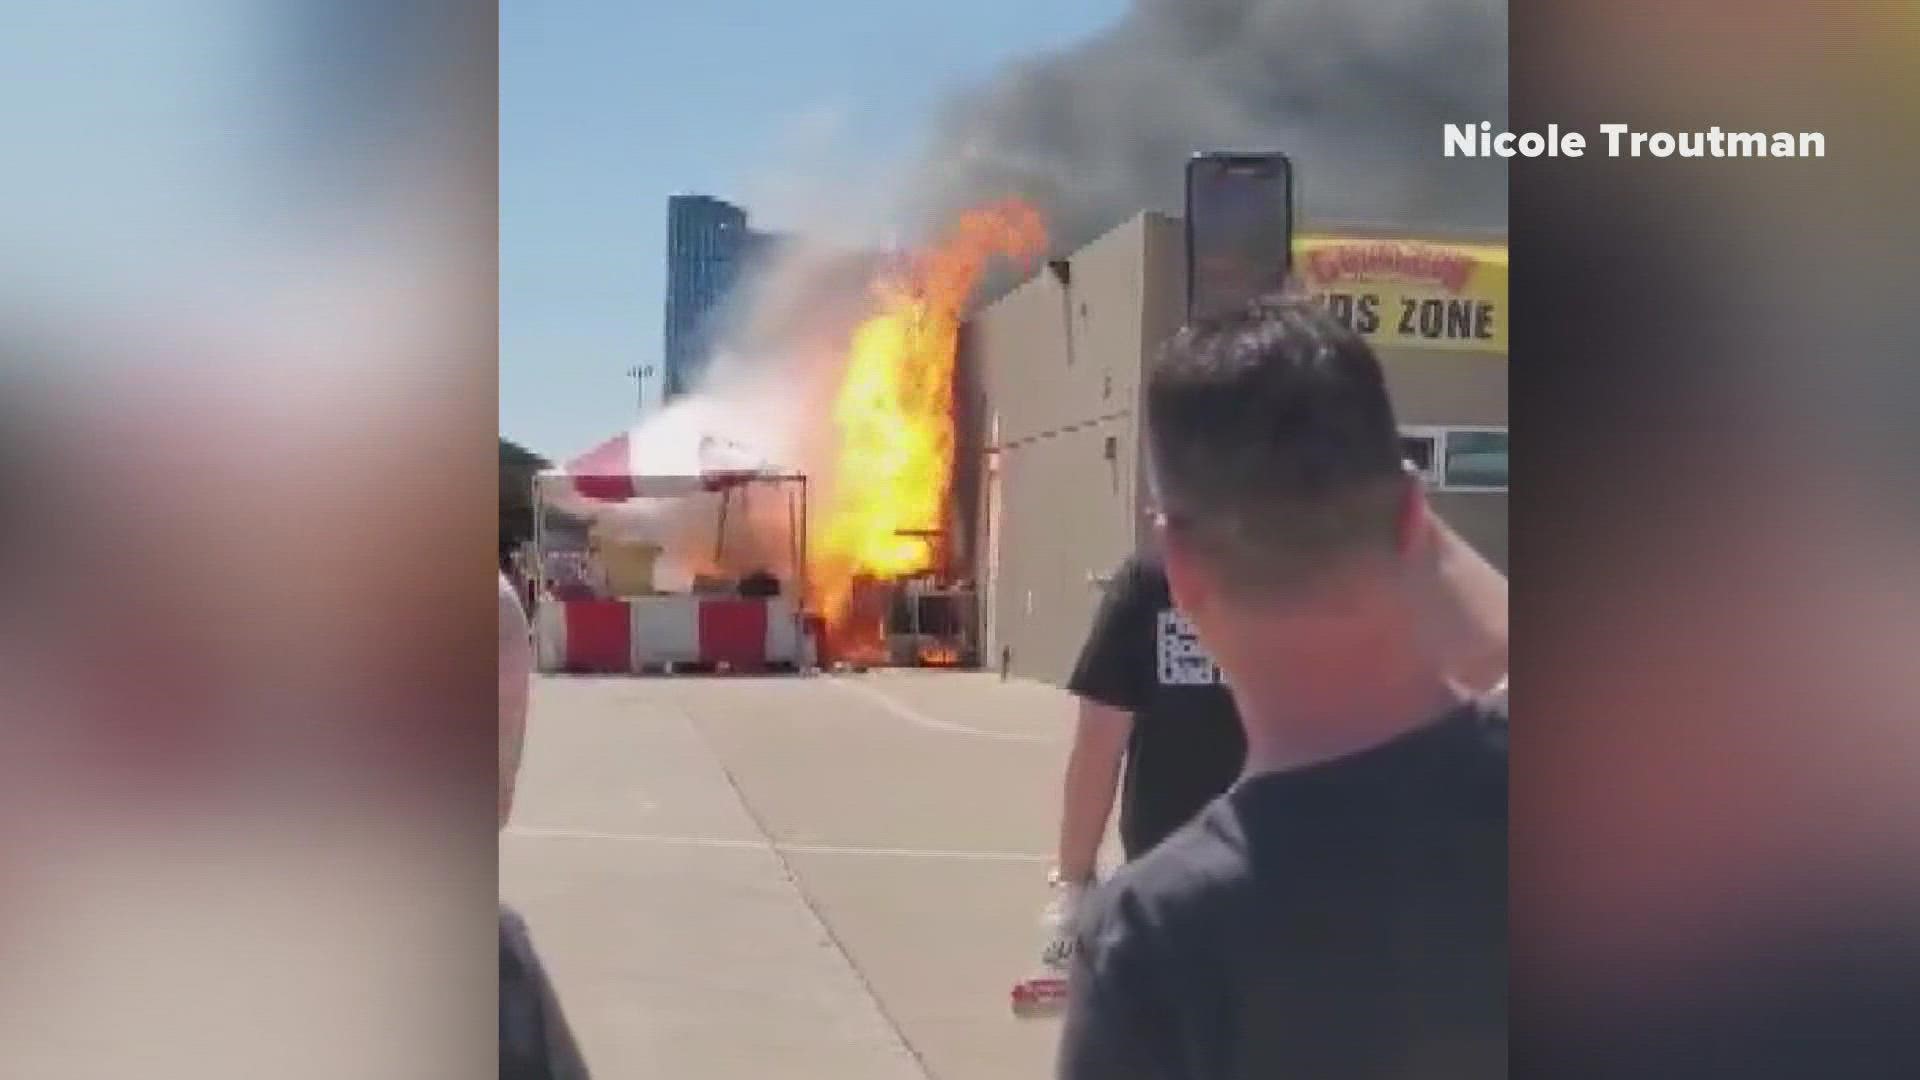 Heavy flames and smoke were seen during an event at Texas Motor Speedway Saturday afternoon.